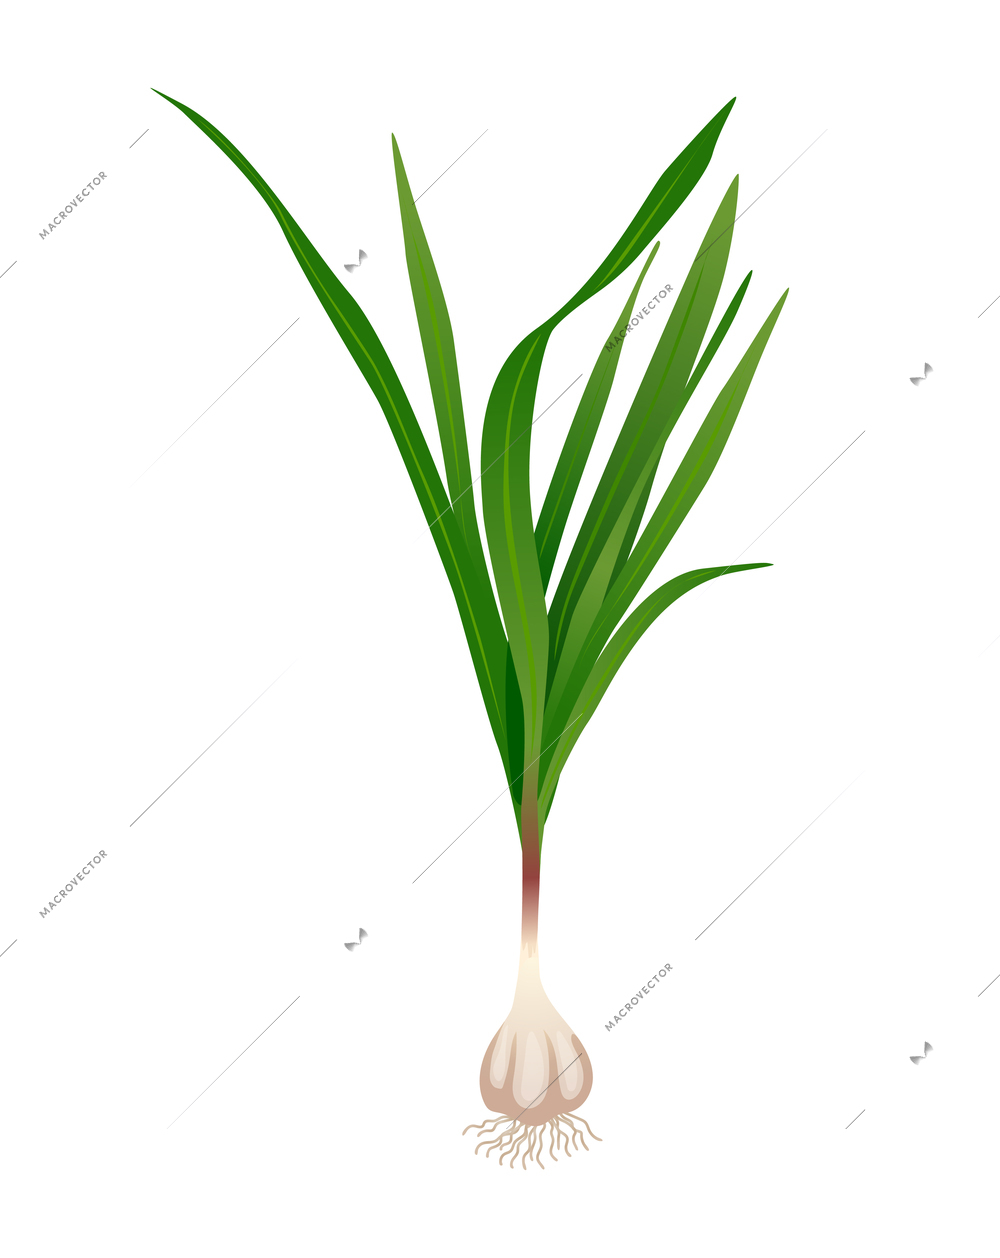 Flat garlic bulb with green tops on white background vector illustration